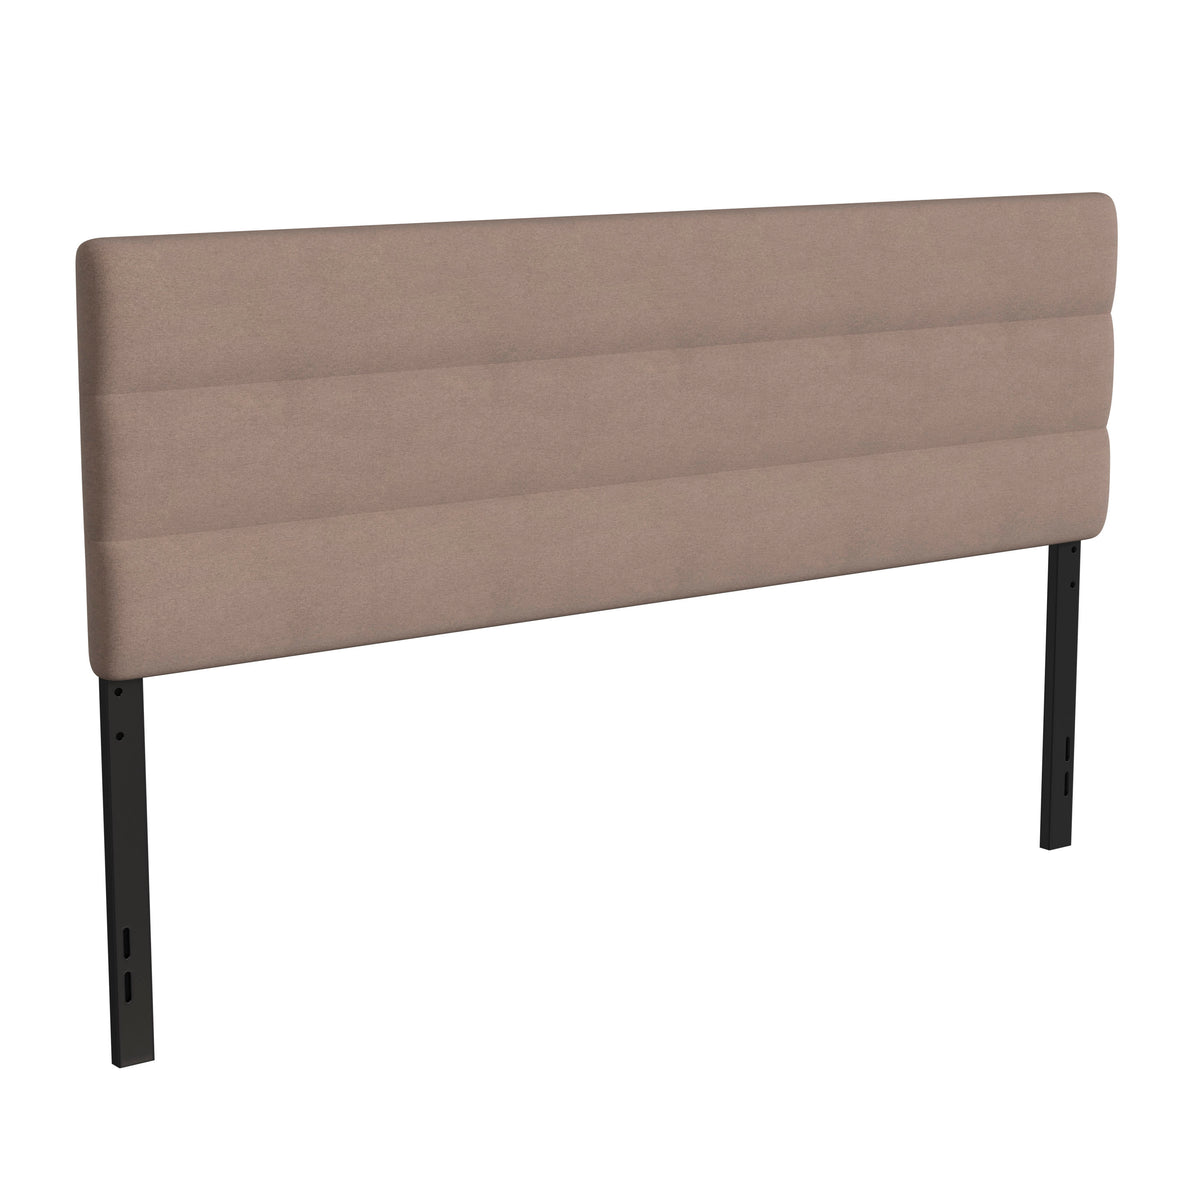 Taupe,King |#| Universal Fit Tufted Upholstered Headboard in Taupe Fabric - King